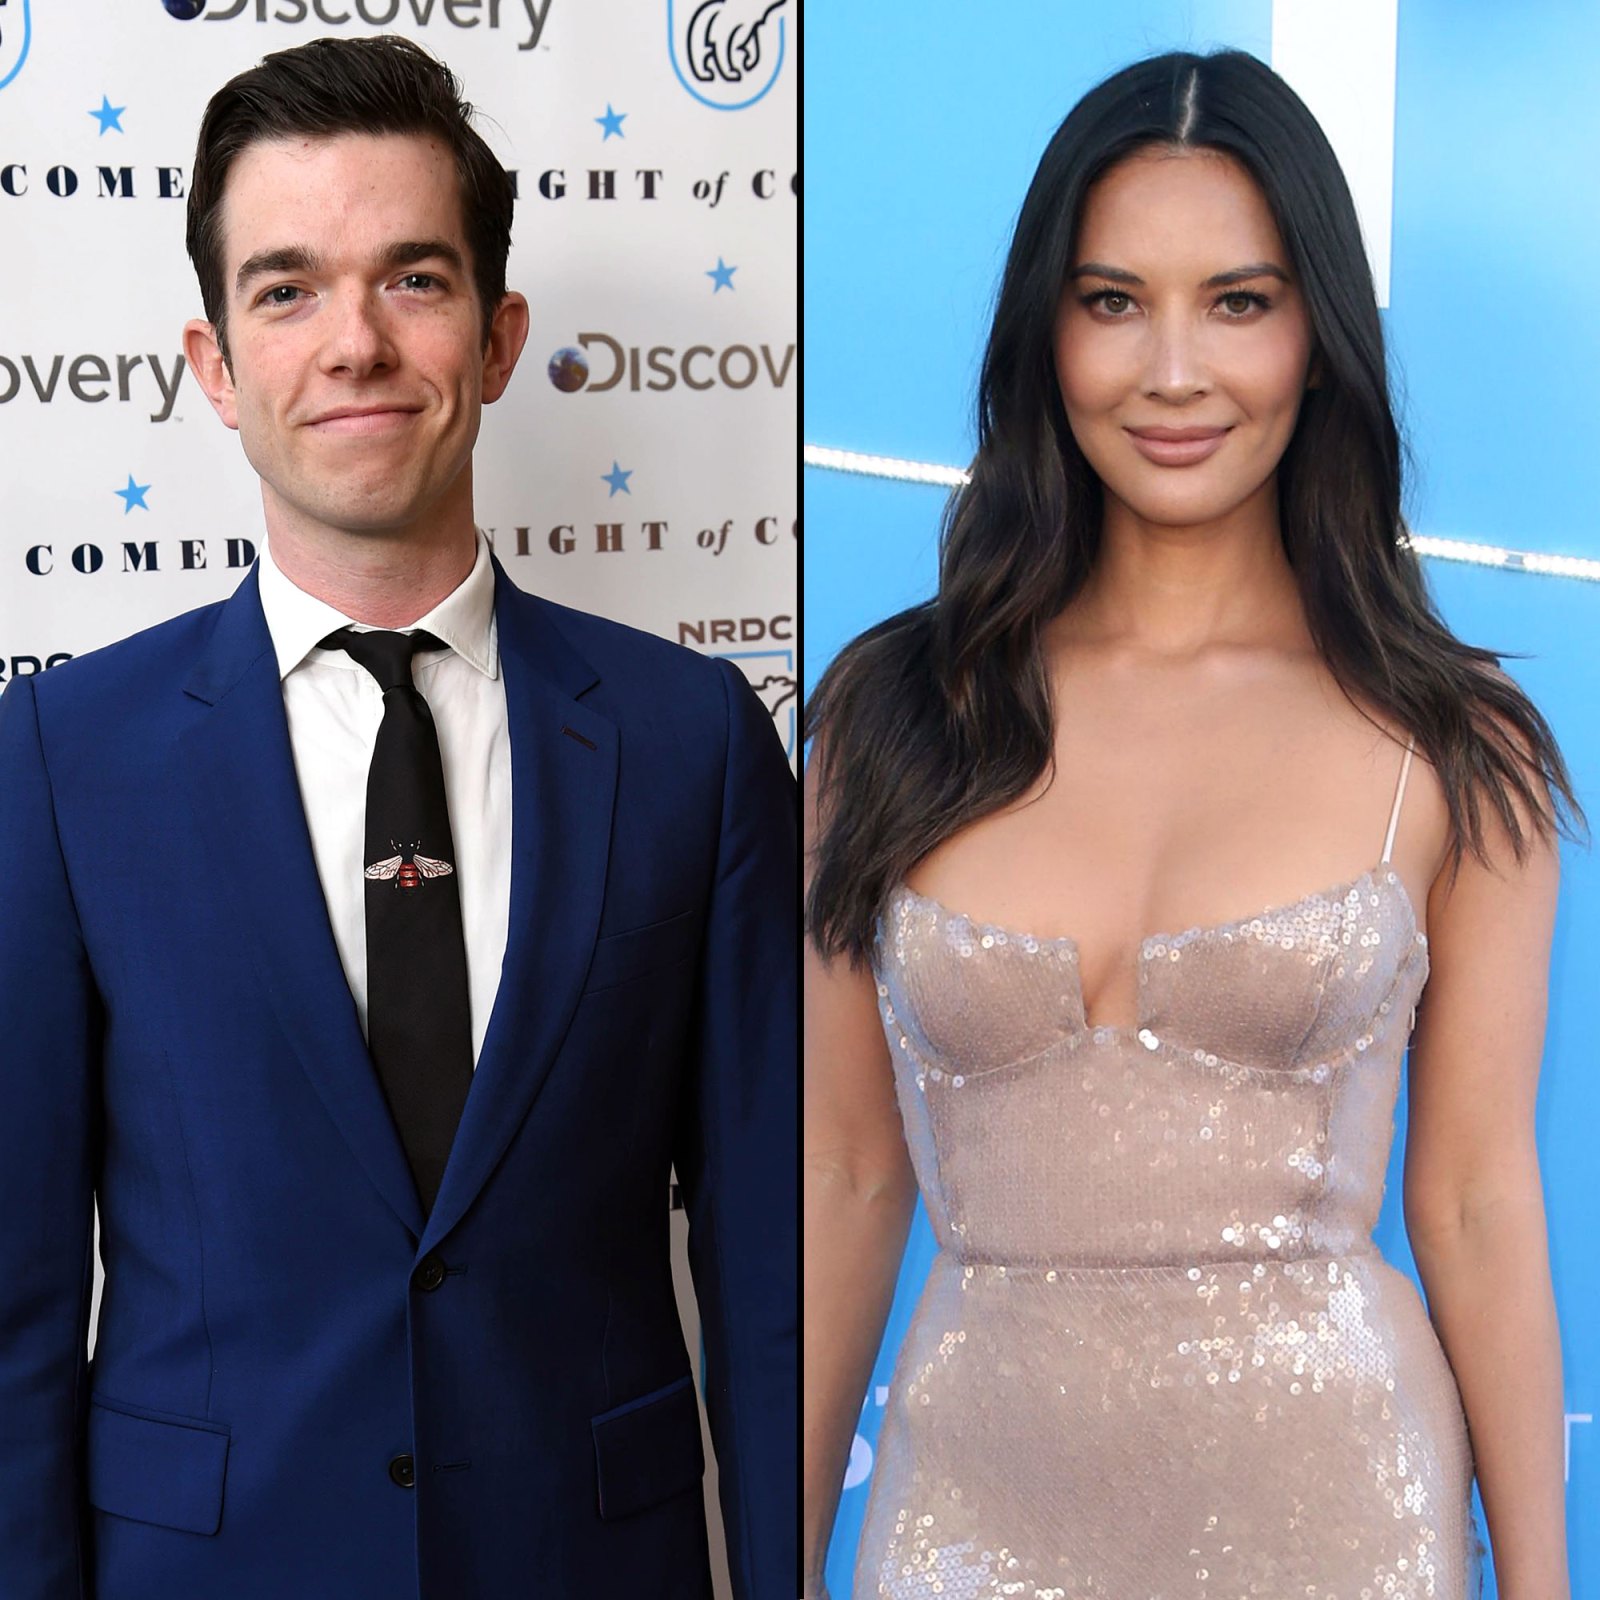 John Mulaney and Olivia Munn Spotted for the 1st Time Enjoying Lunch Date in Los Angeles